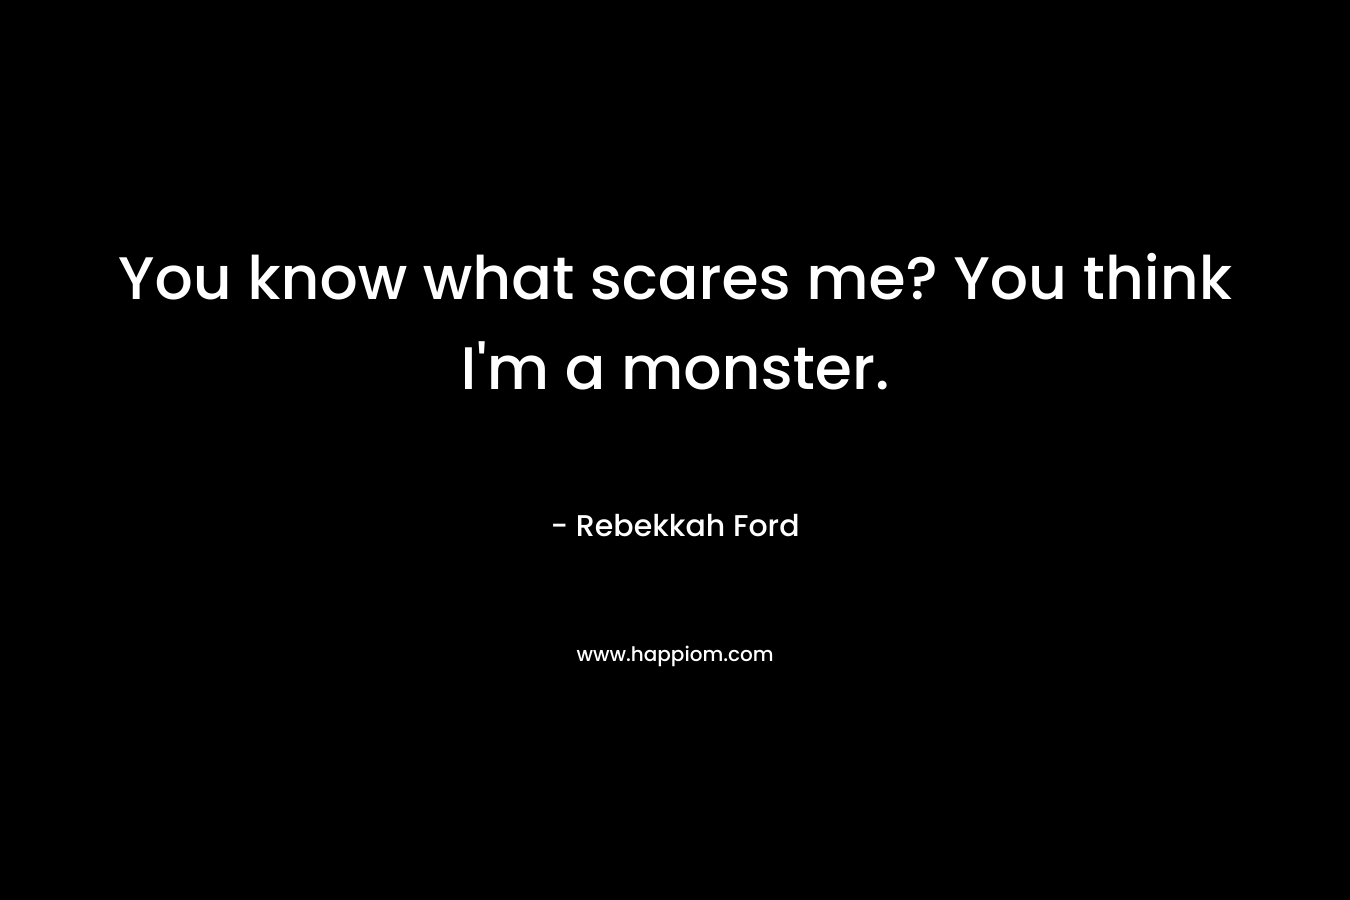 You know what scares me? You think I'm a monster.